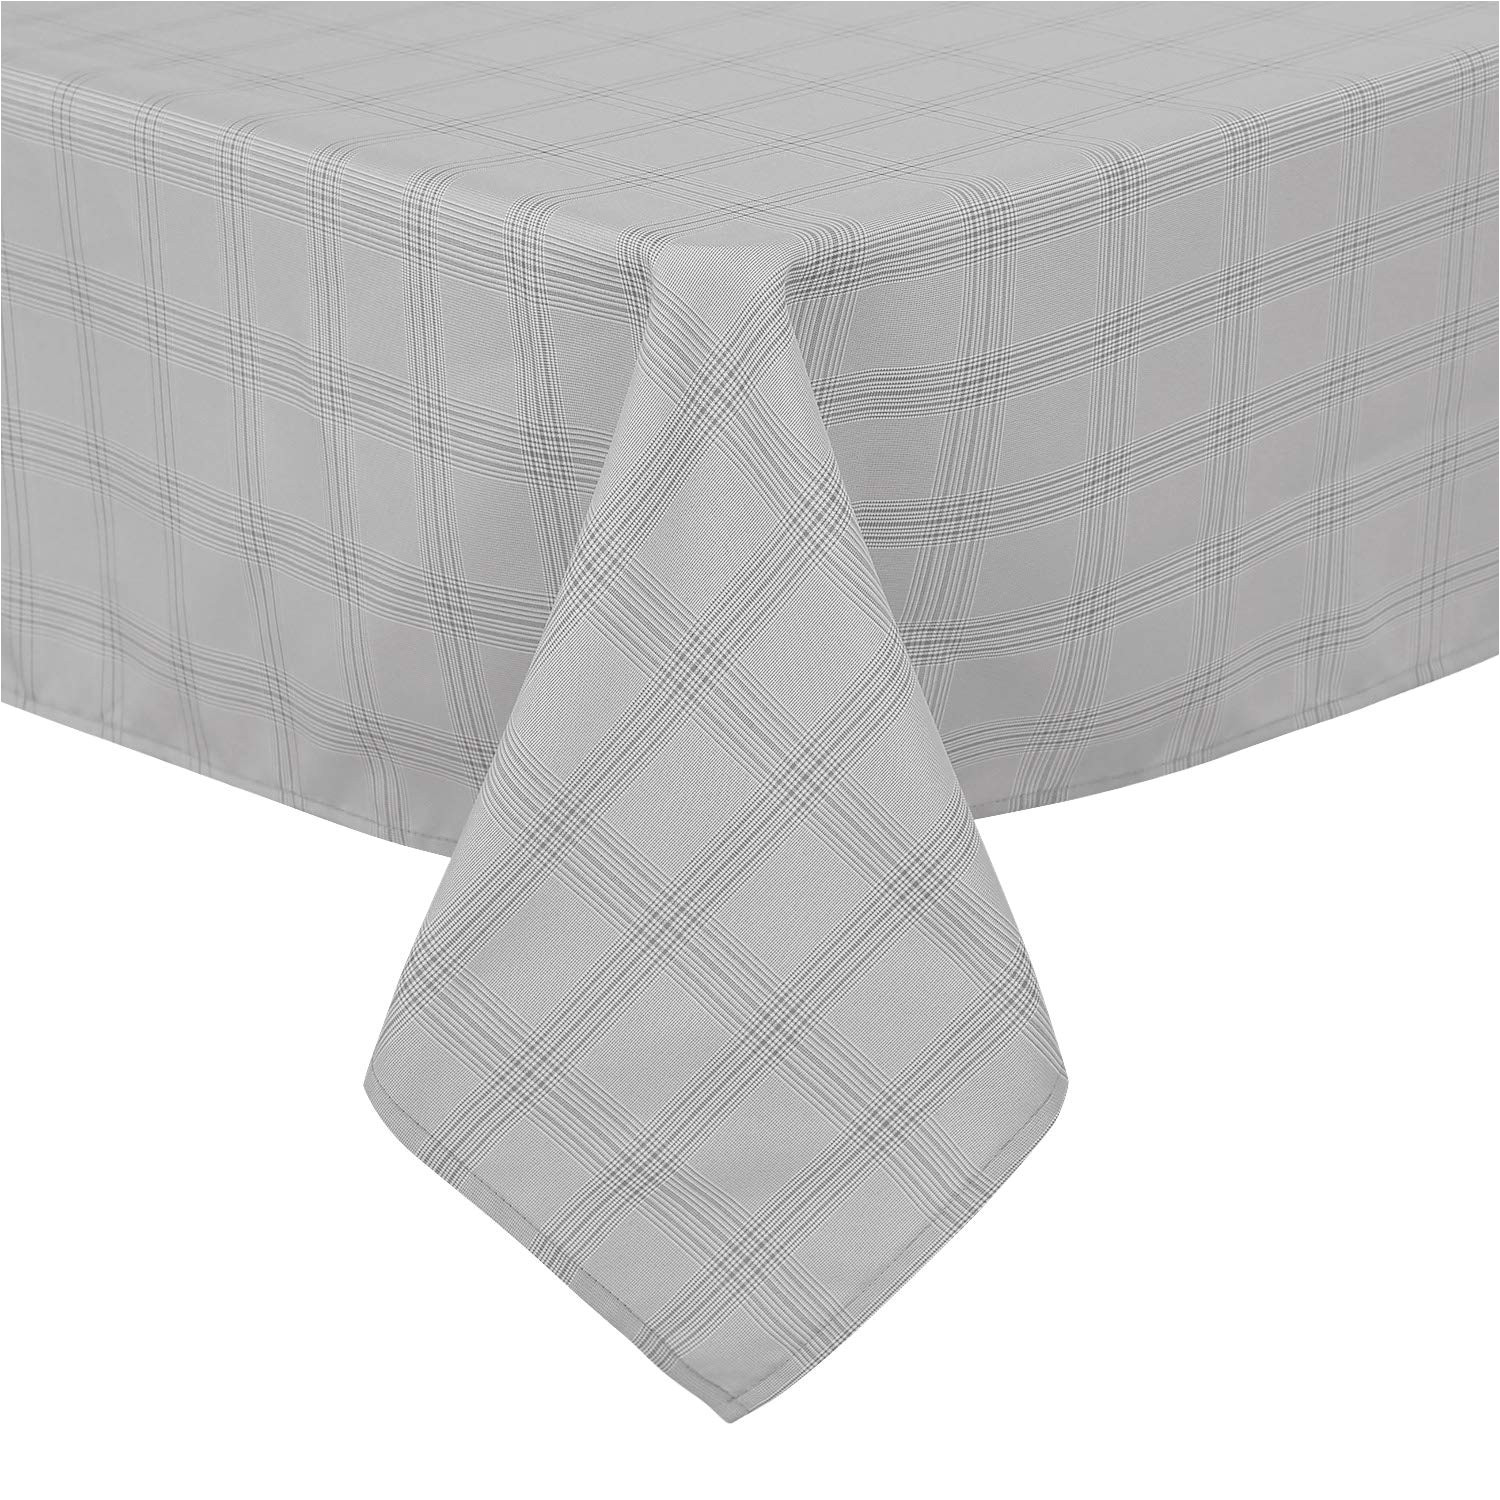 amazon com deconovo light grey checkered tablecloths rectangular polyester tablecloth water resistant plaid table cloths table cover for dining table 54x72